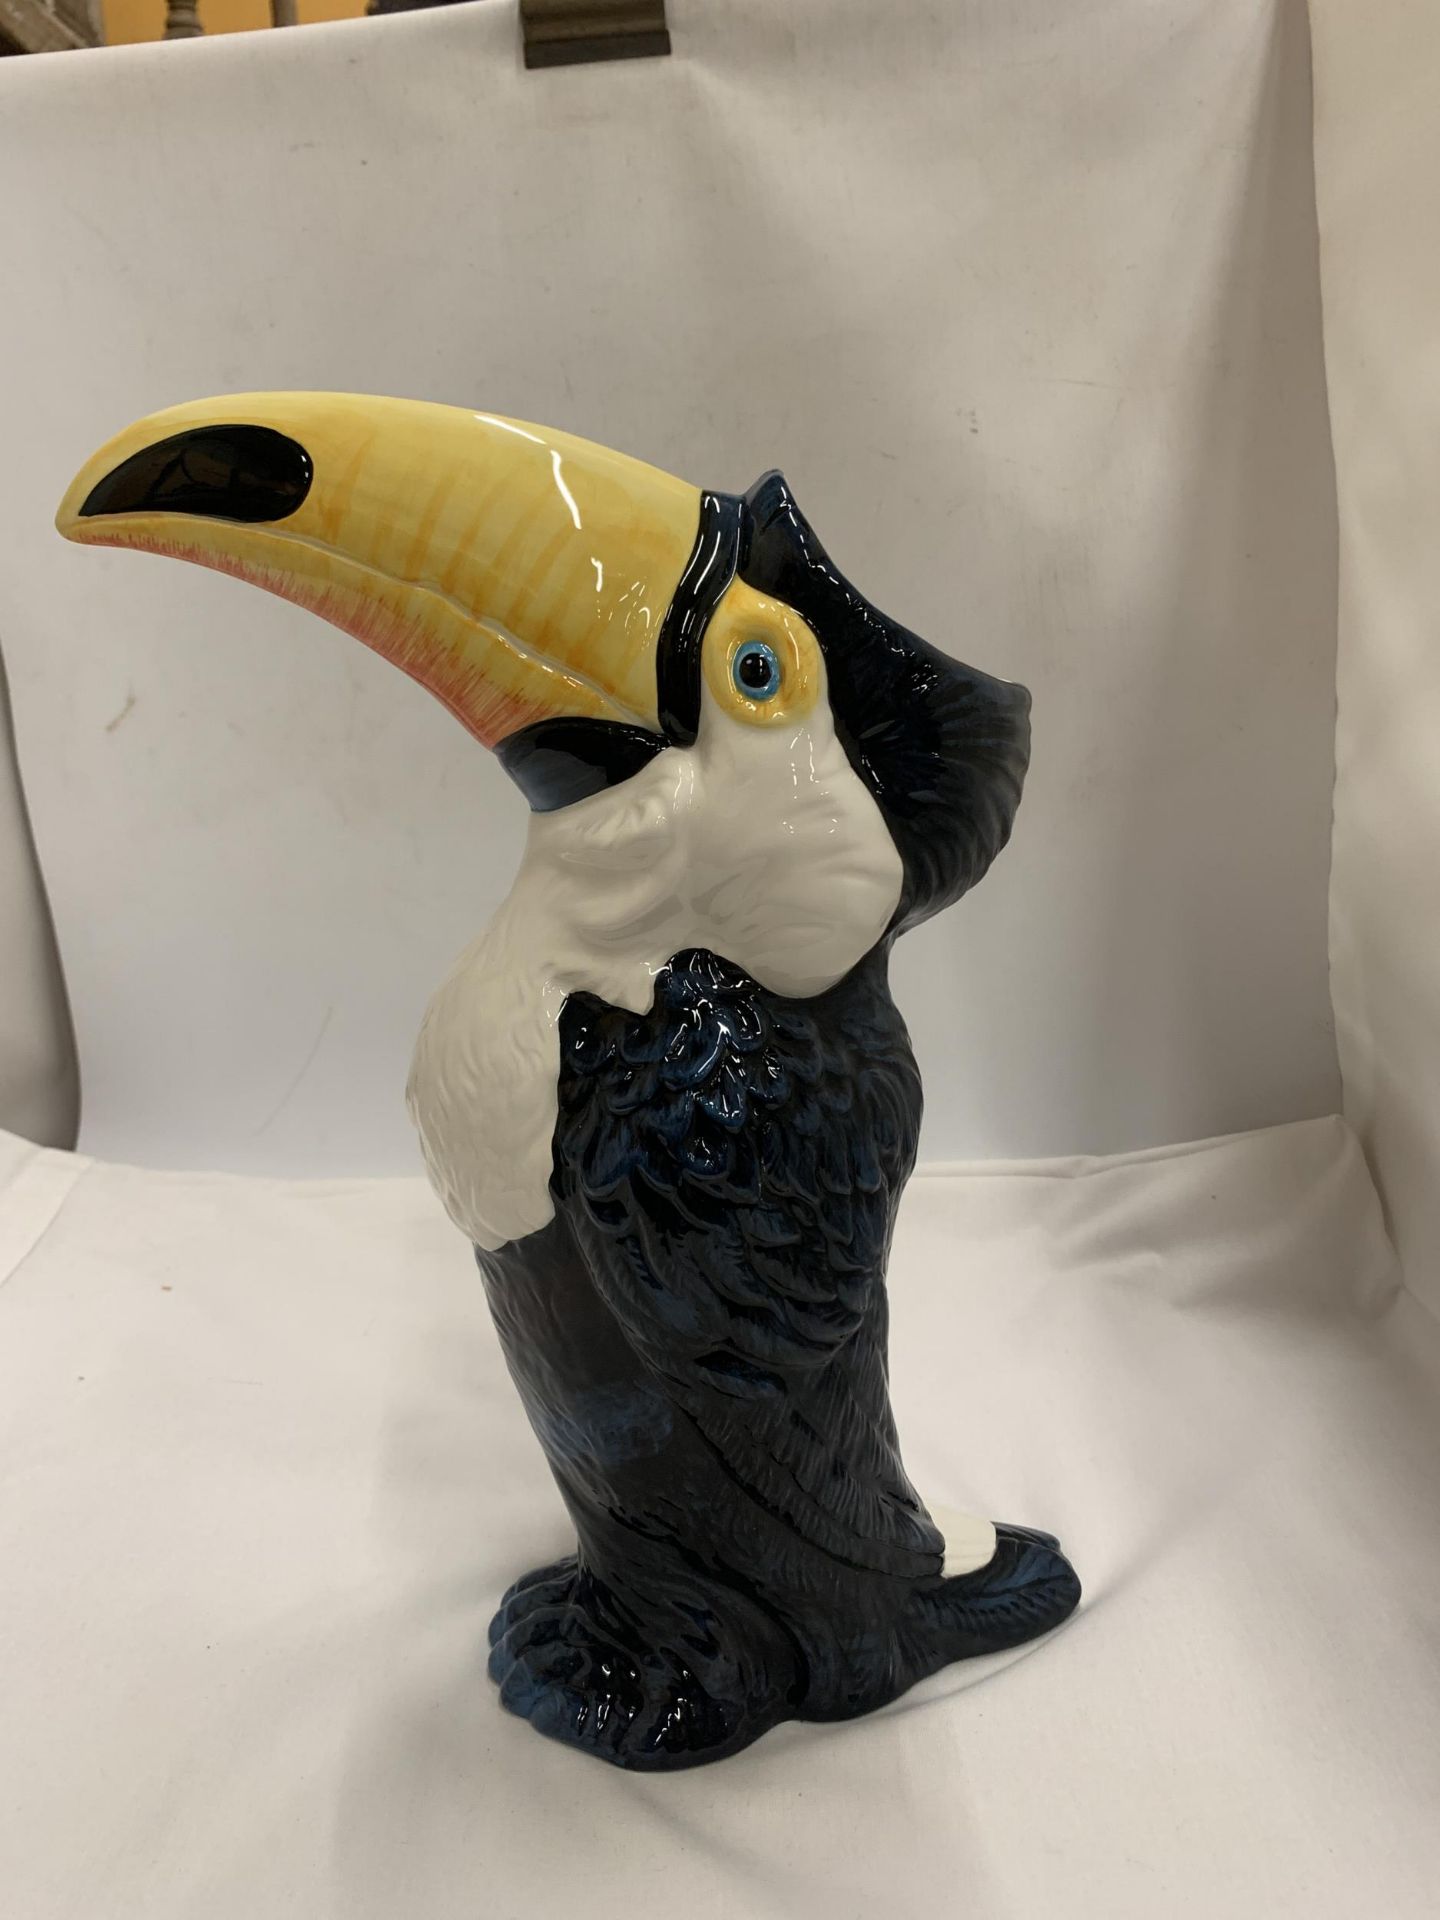 A DRAGONFLY JACK GRAHAM DESIGN TOUCAN FIGURE - Image 3 of 7